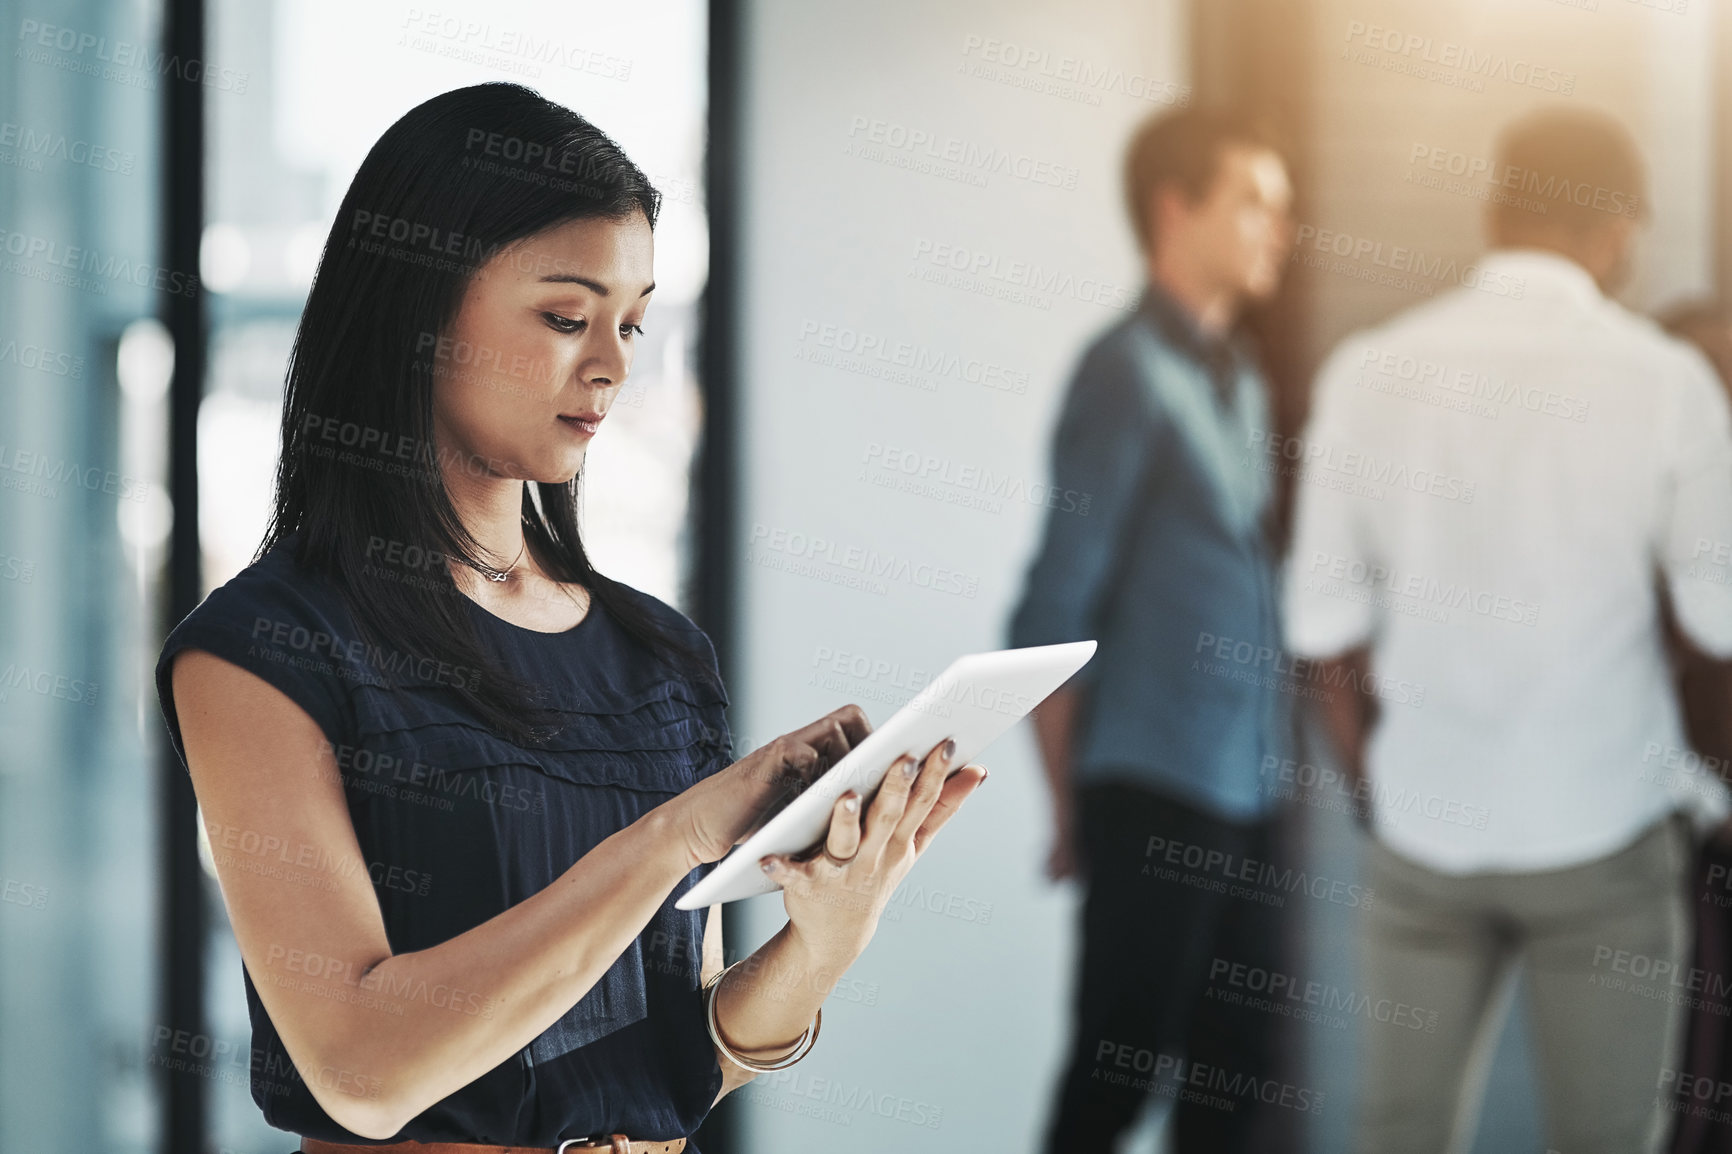 Buy stock photo Shot of a young businesswoman using her digital tablet in a modern office with her colleagues in the background